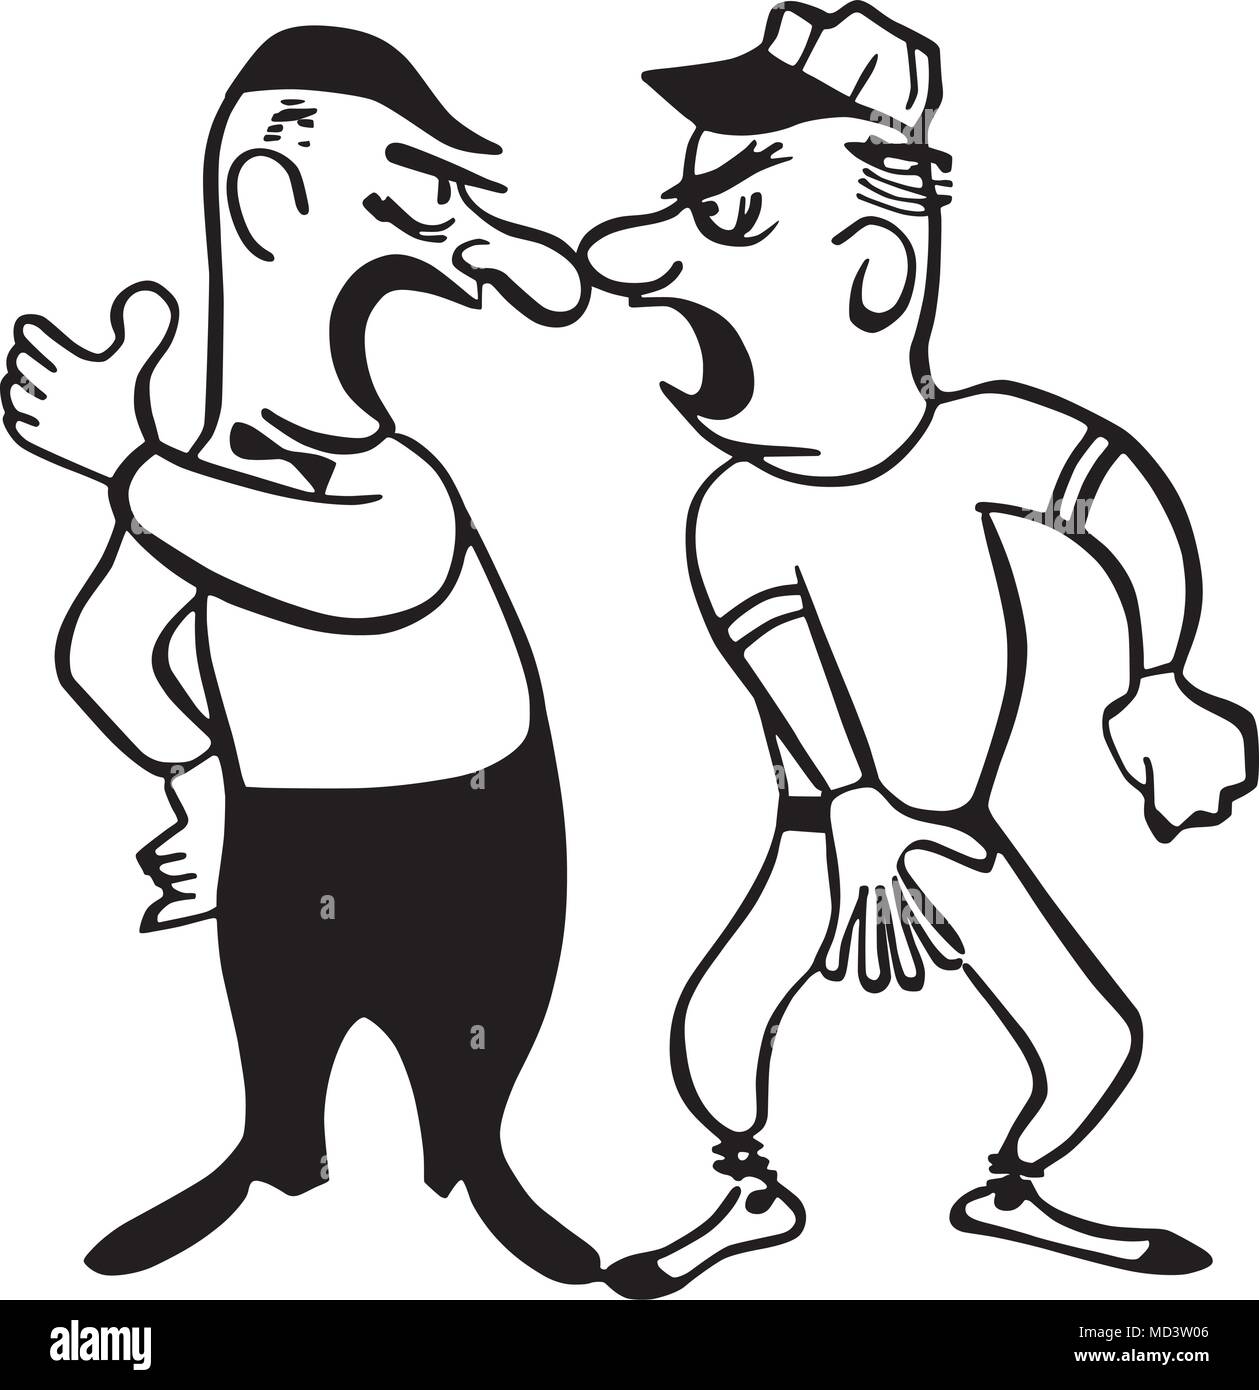 Arguing With The Umpire - Retro Clipart Illustration Stock Vector